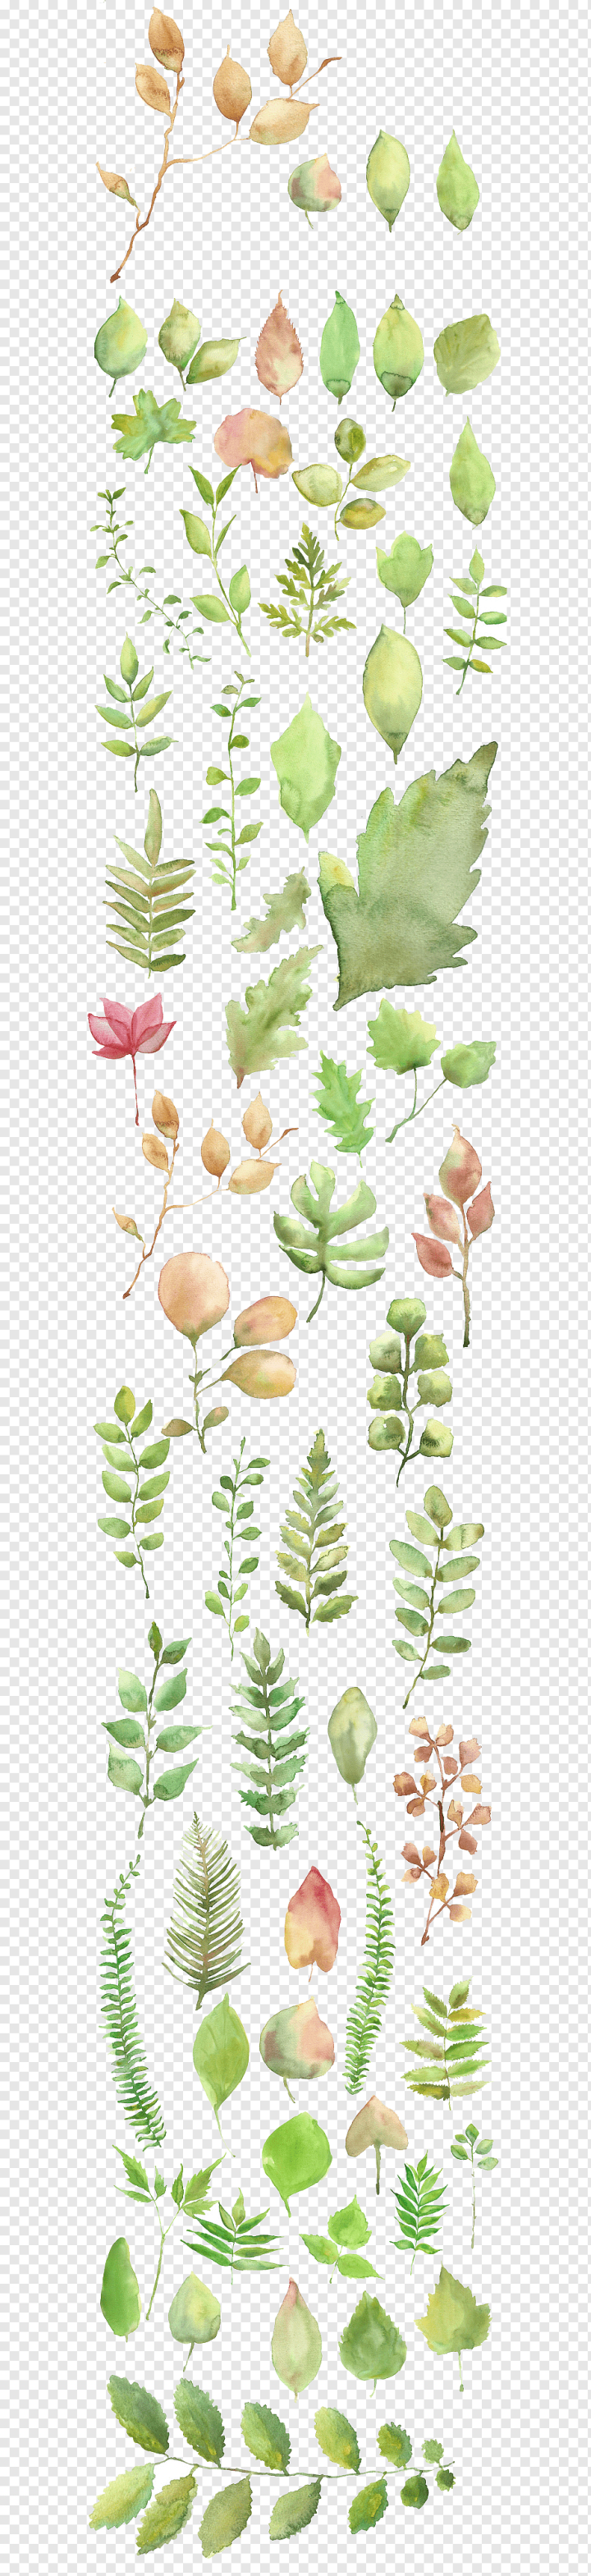 texture,watercolor Leaves,leaf,watercolor Vector,plant Stem,fall Leaves,flower,palm Leaves,painting,leaves,watercolor Flowers,petal,plant,watercolor Flower,small Fresh,watercolor,tree,shading Decoration,shading Vector,small,organism,decoration,drawing,flora,floral Design,flowering Plant,fresh,graphic Design,gratis,green,handpainted,handpainted Watercolor,leaves Vector,material Vector,nature,autumn Leaves,Watercolor painting,Shading,material,png,transparent,free download,png